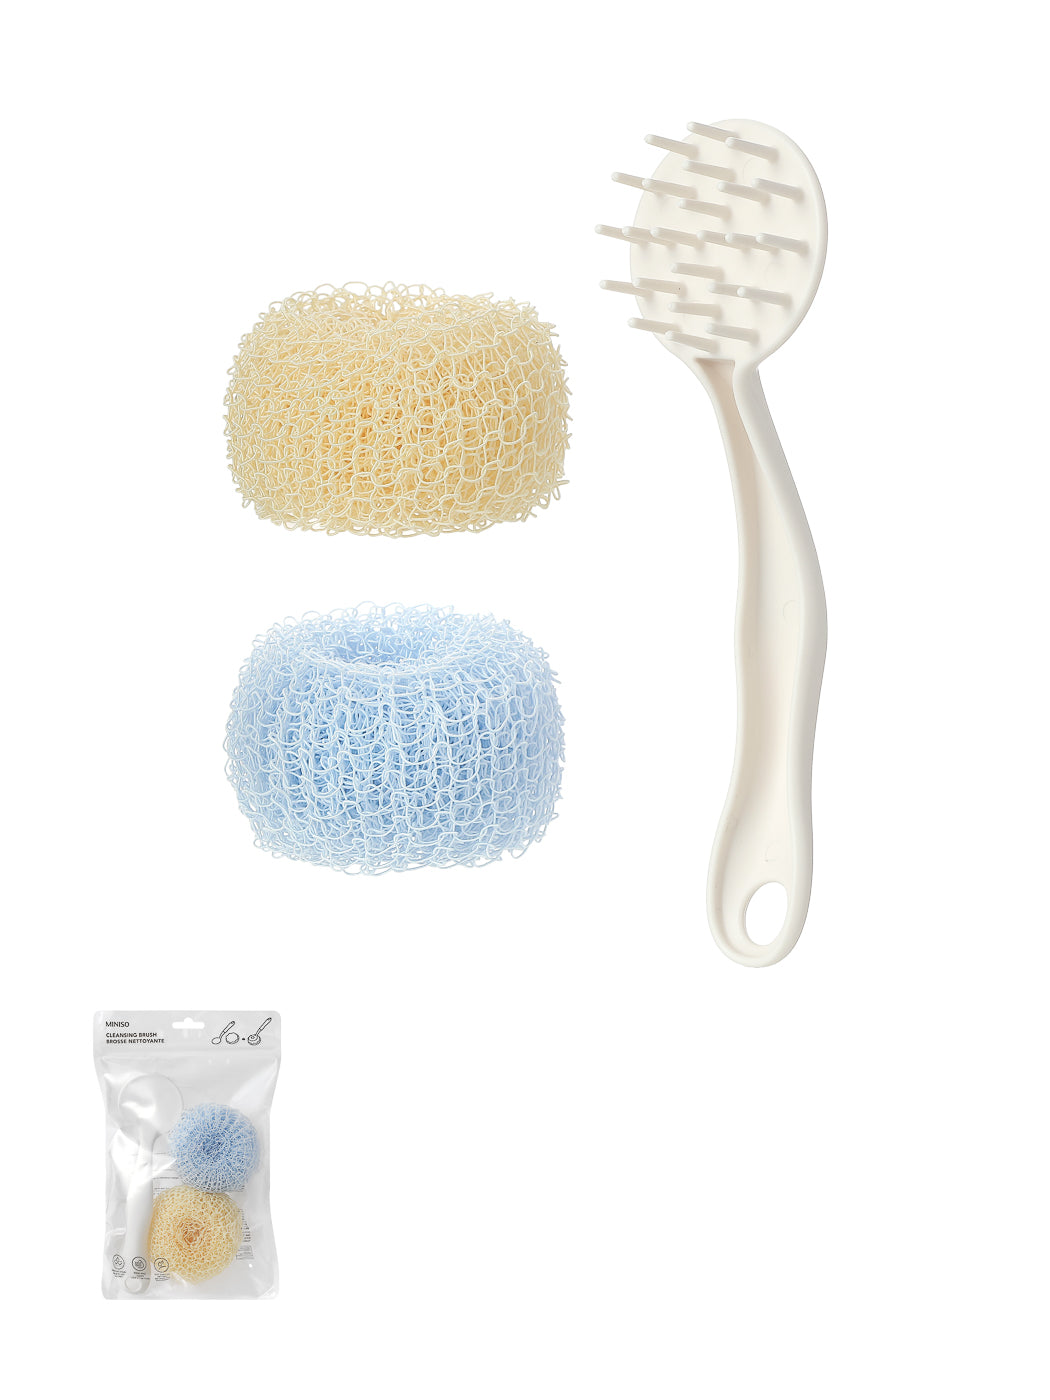 MINISO KITCHEN CLEANSING BRUSH (WITH REPLACEMENT)(PURPLE+YELLOW) 2010443110103 CLEANING PRODUCTS